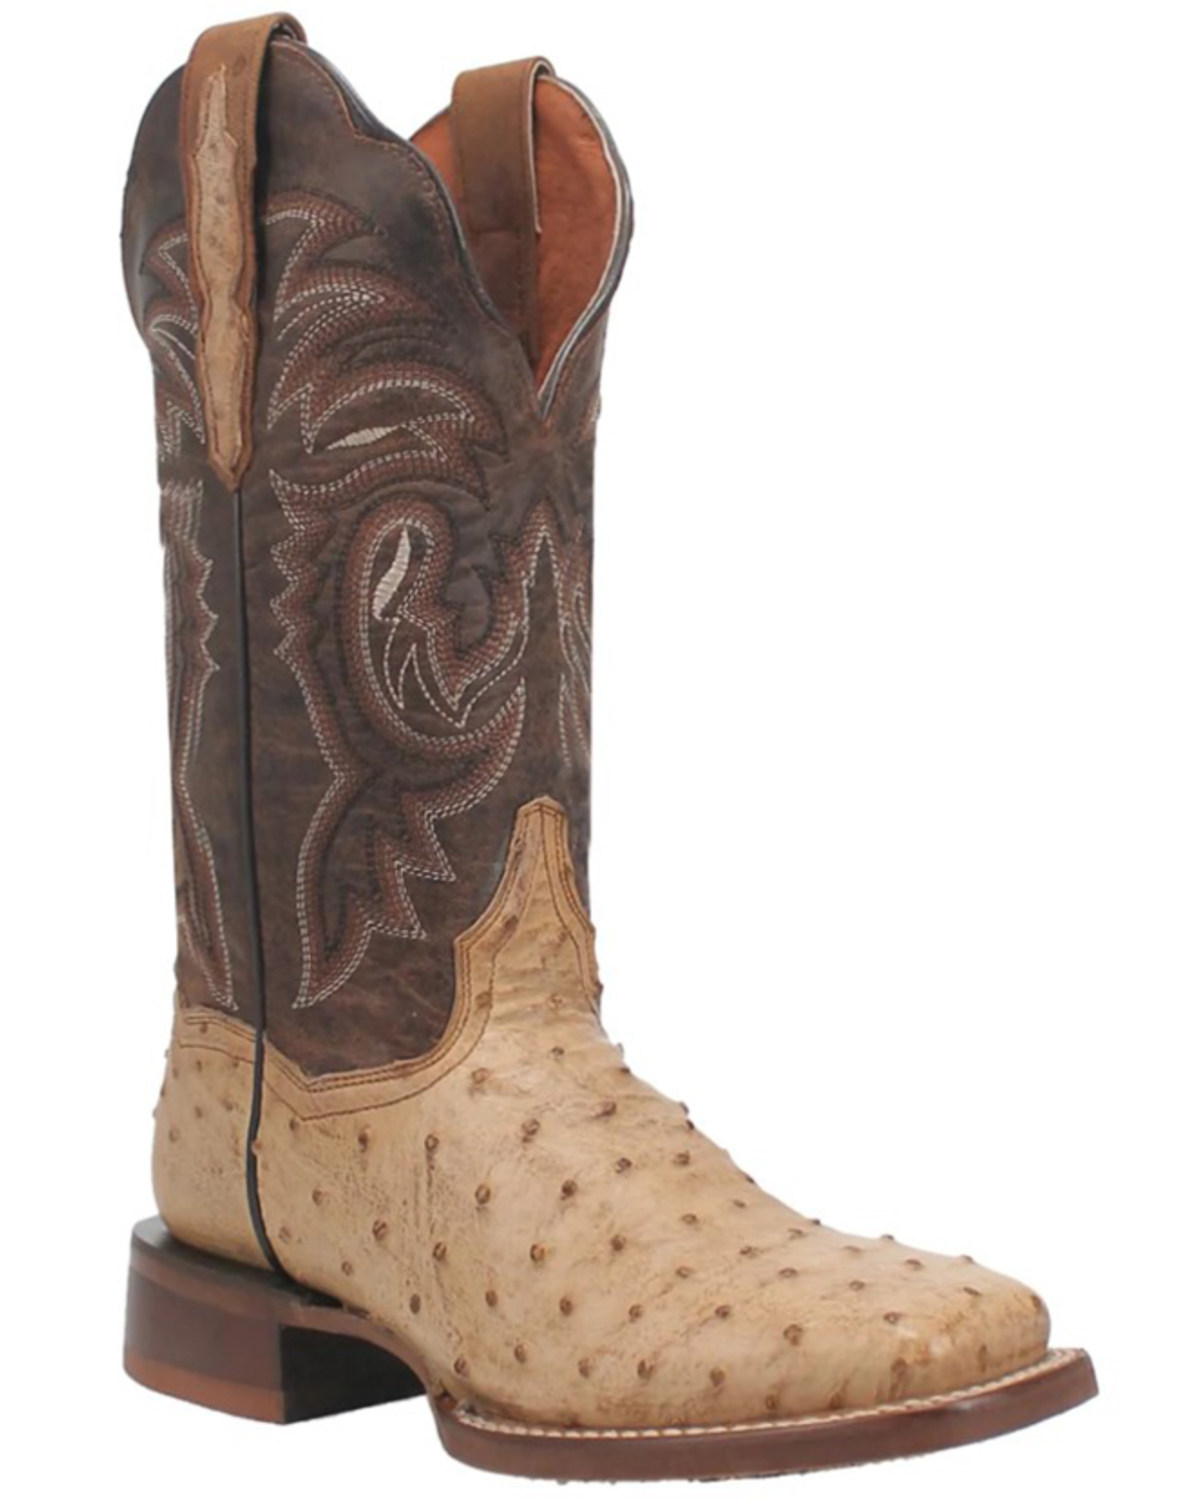 Dan Post Women's Exotic Full Quill Ostrich Western Boots - Broad Square Toe